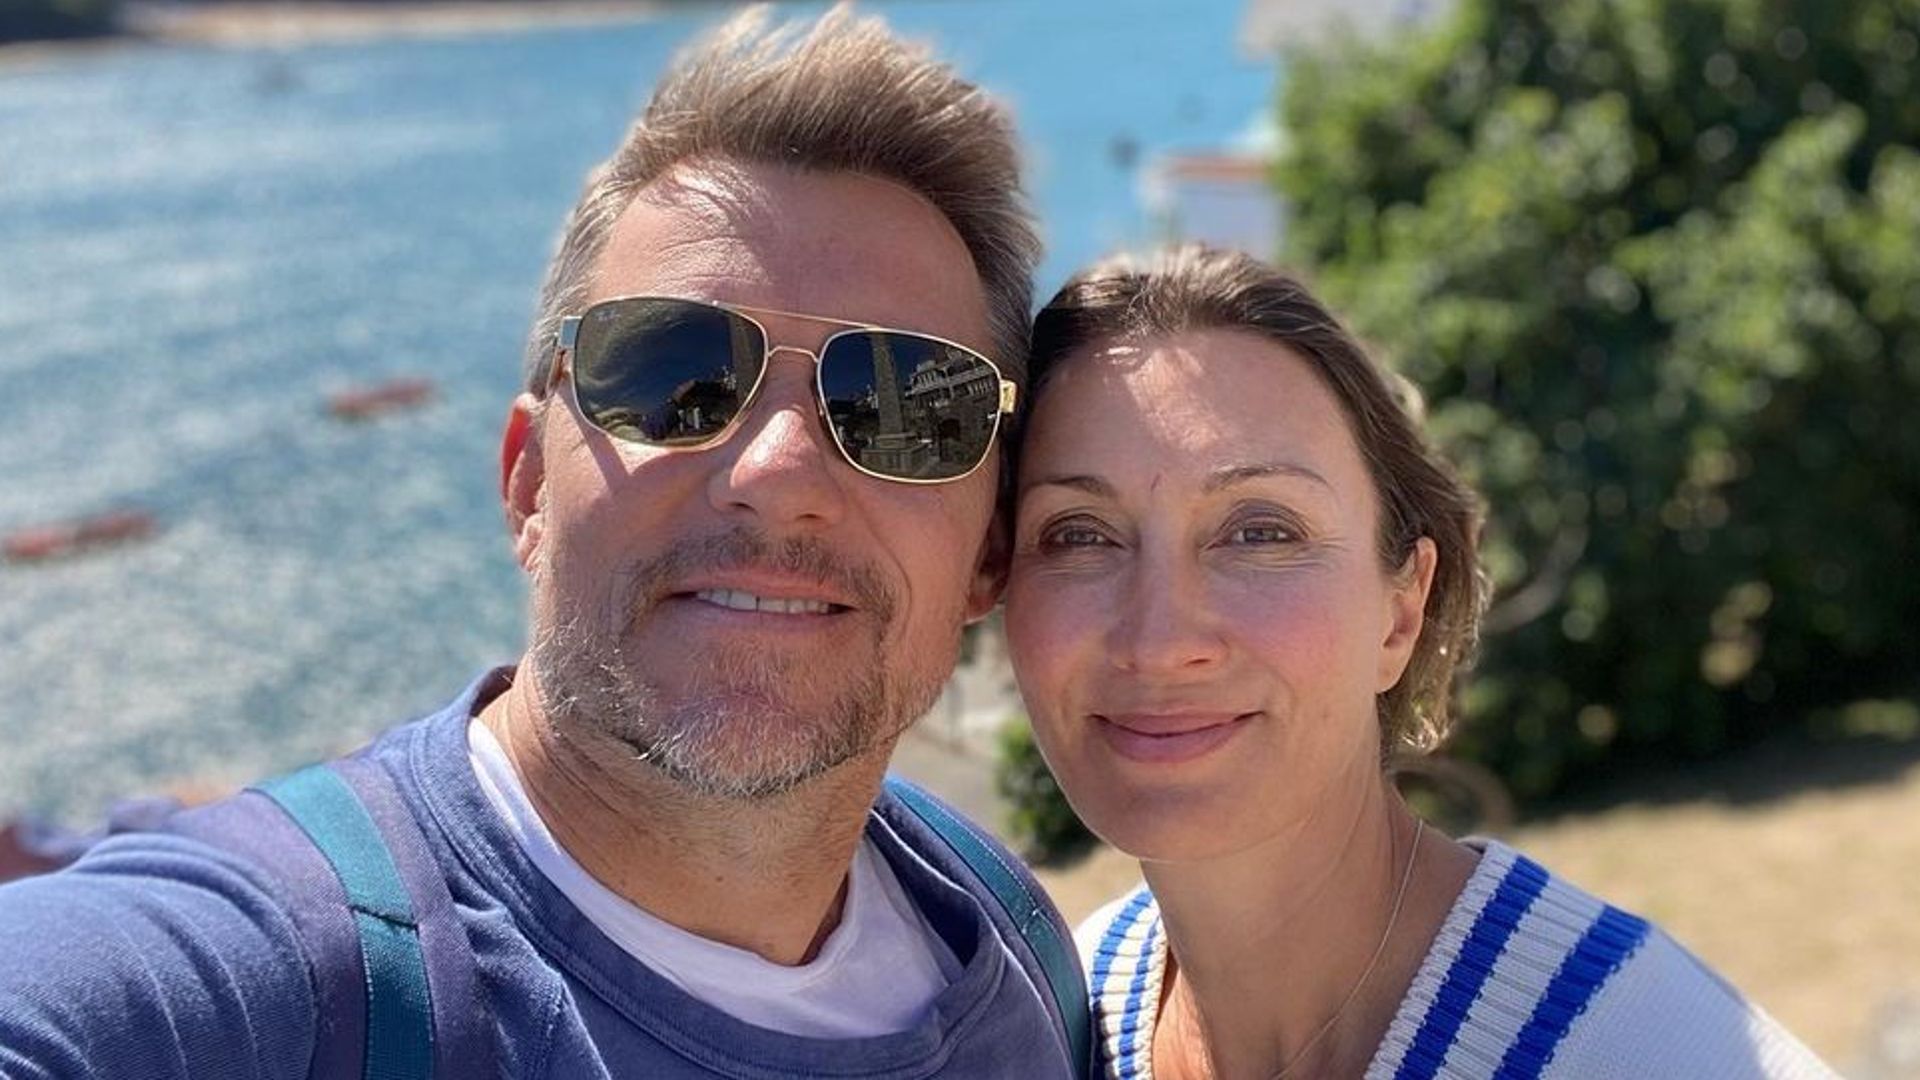 Ben Shephard with wife Annie